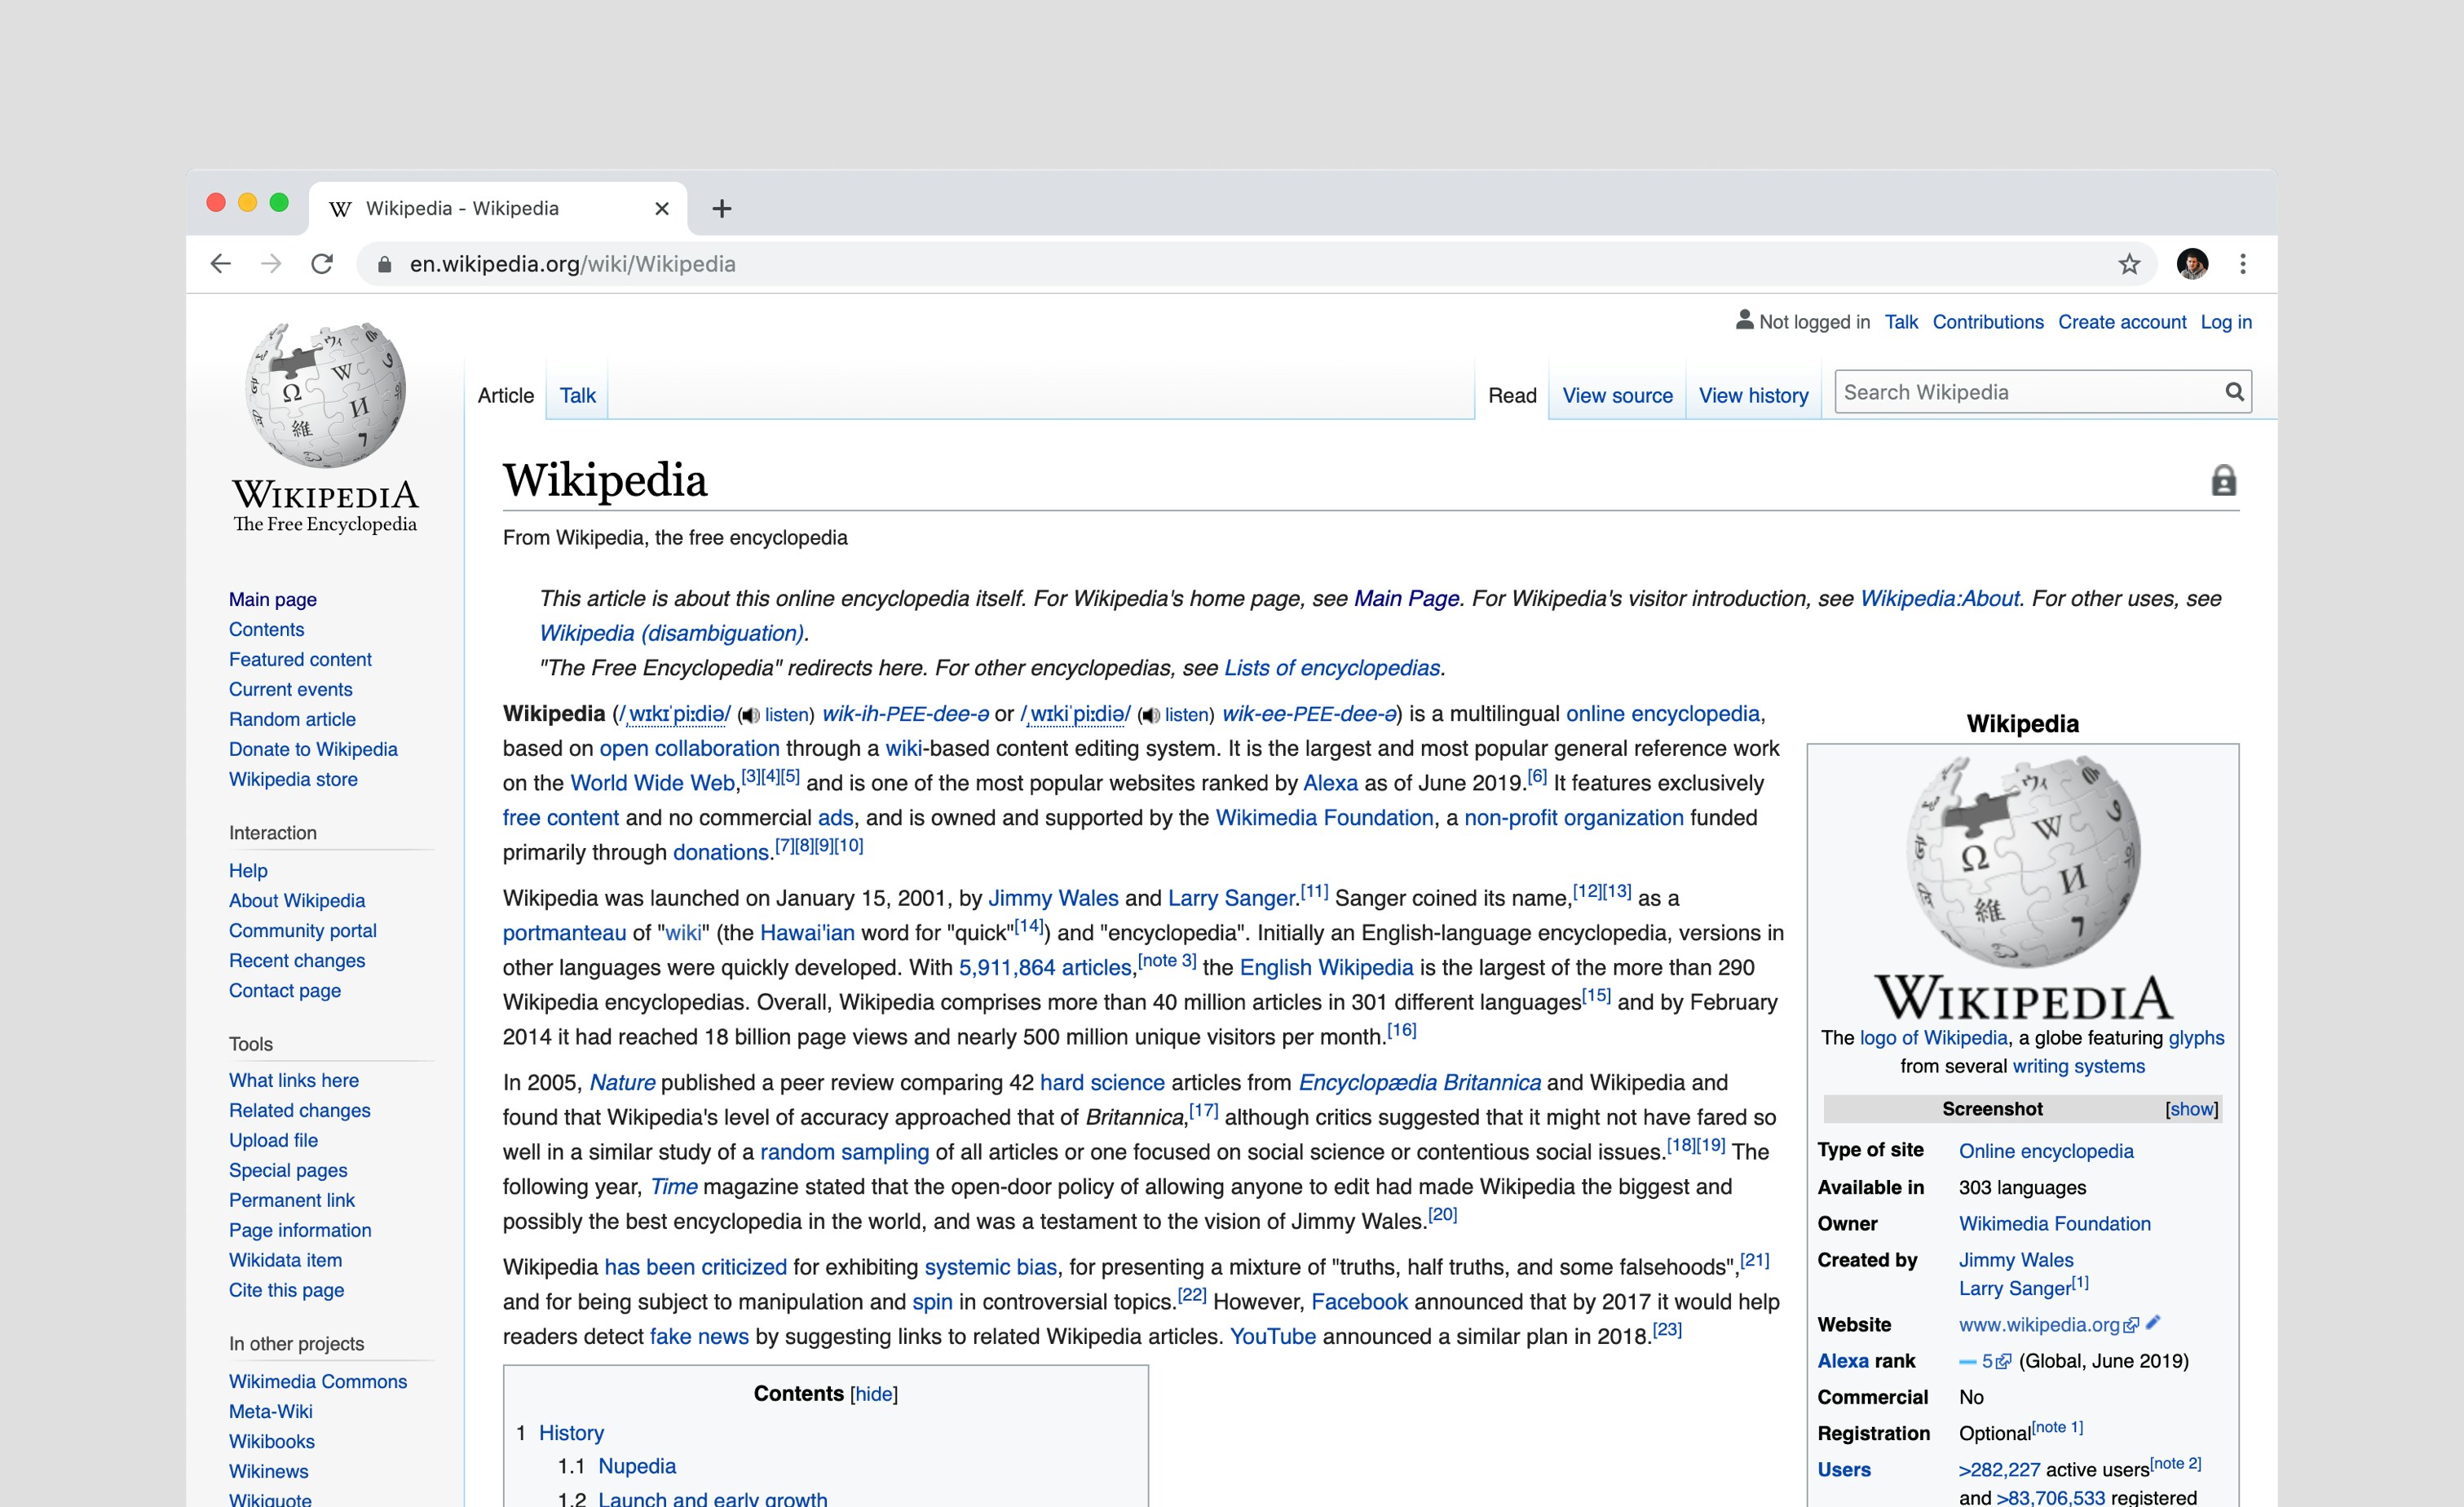 Elon Musk offers $1 billion to Wikipedia to change their name to